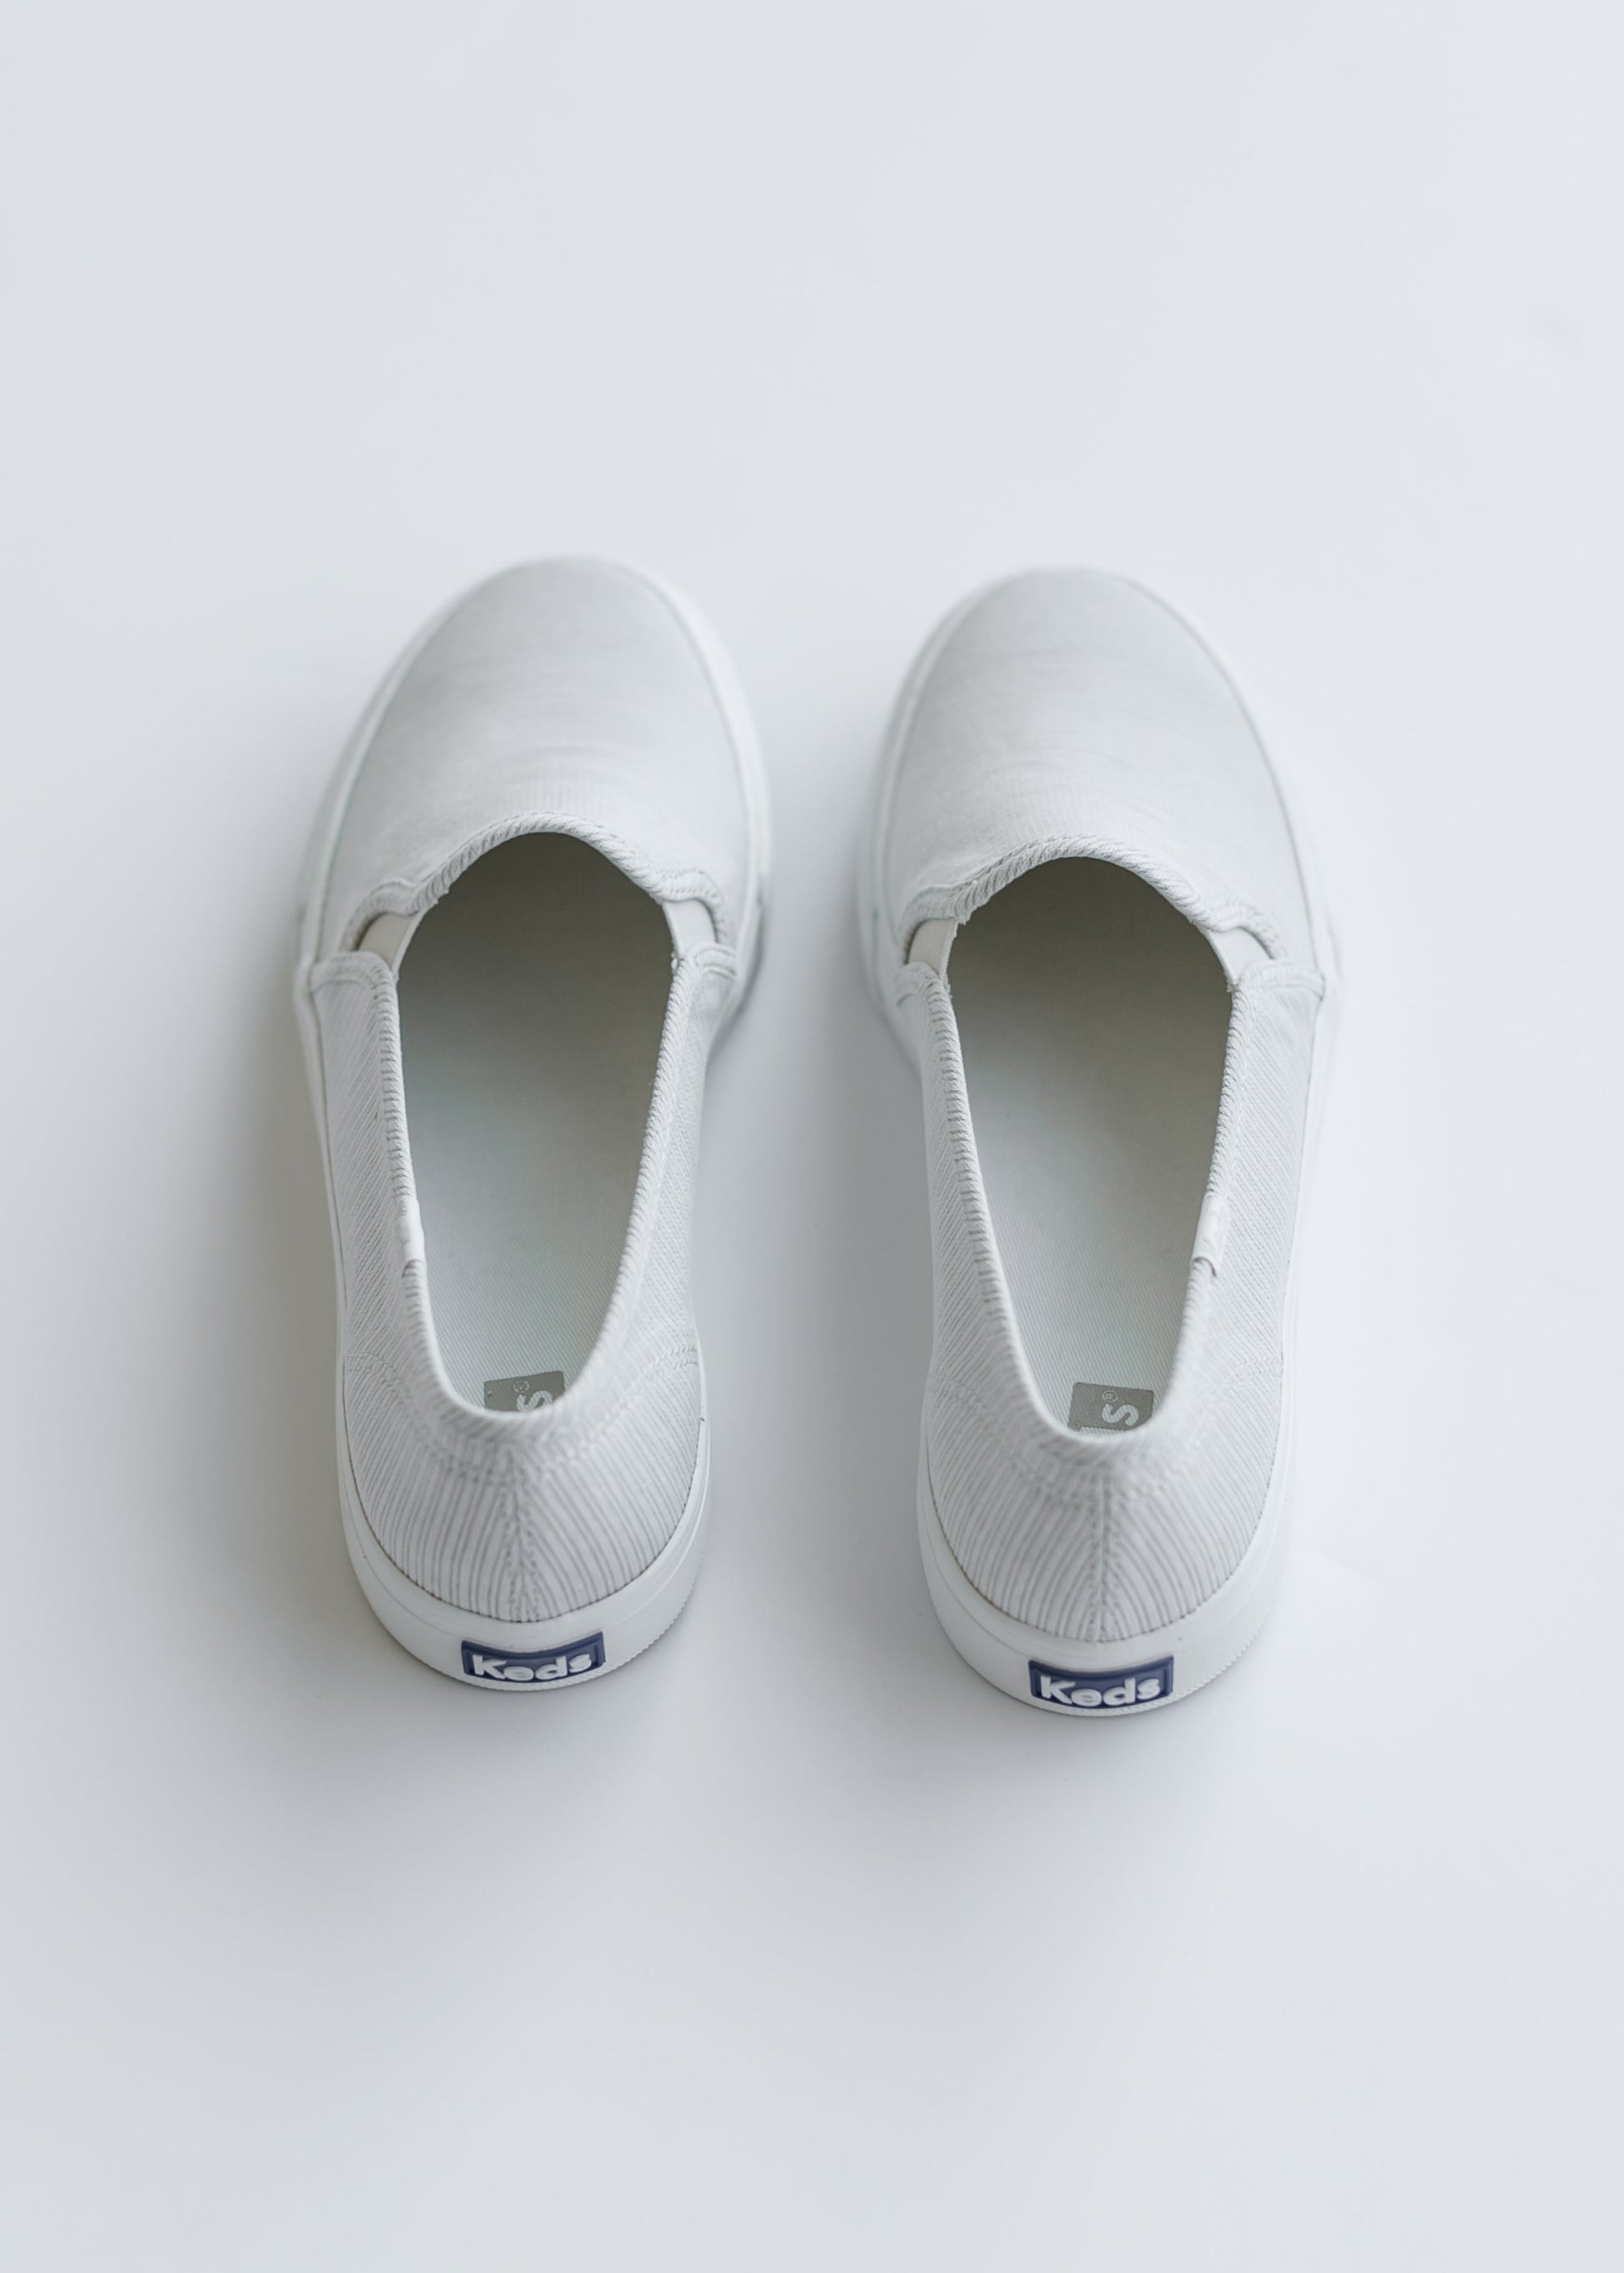 Keds® Double Decker Textured Oat Sneakers Shoes